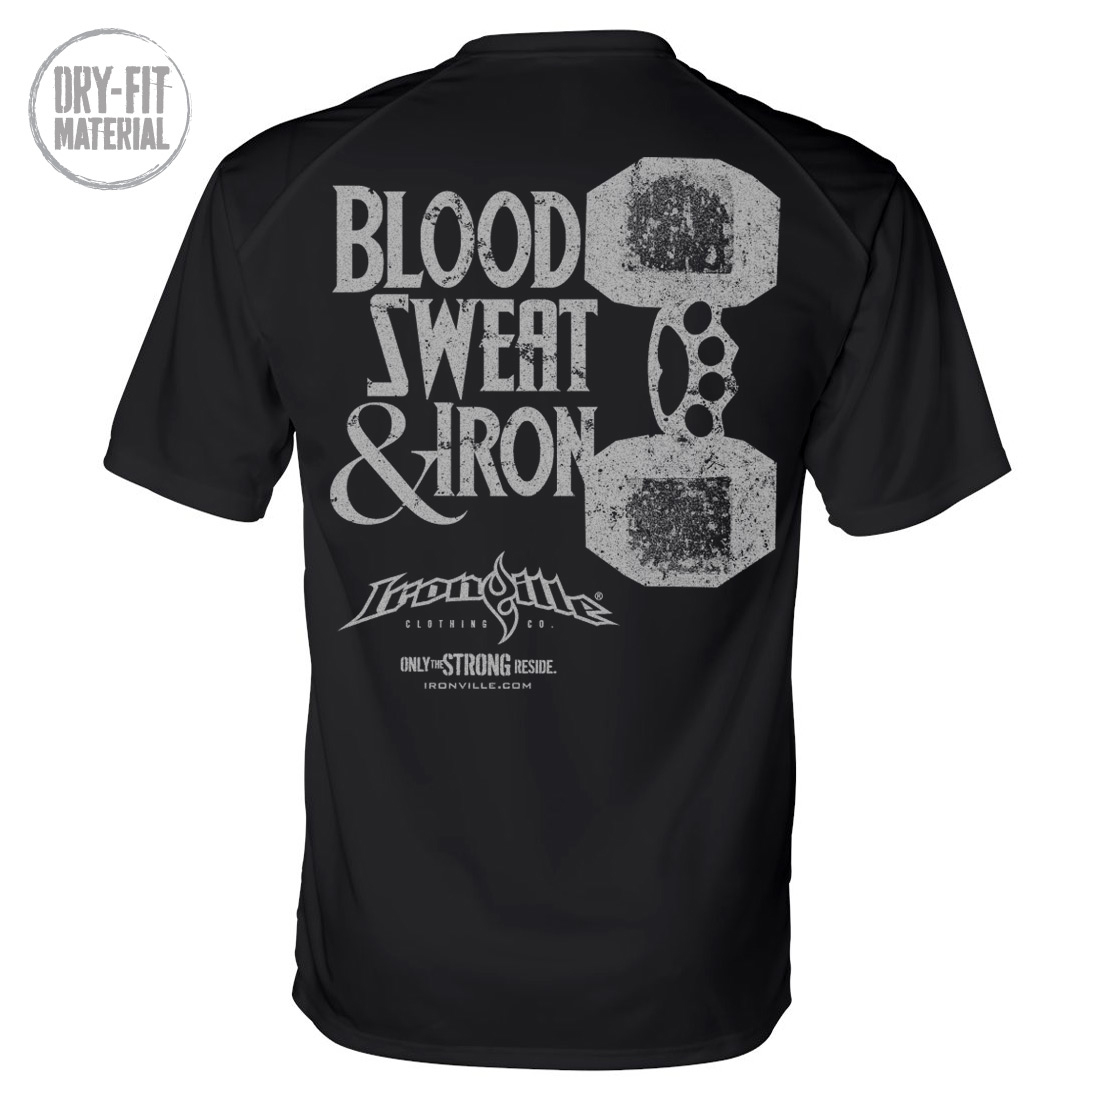 Blood Sweat & Iron | Brass knuckles Dumbbell Weightlifting Dri-Fit T ...